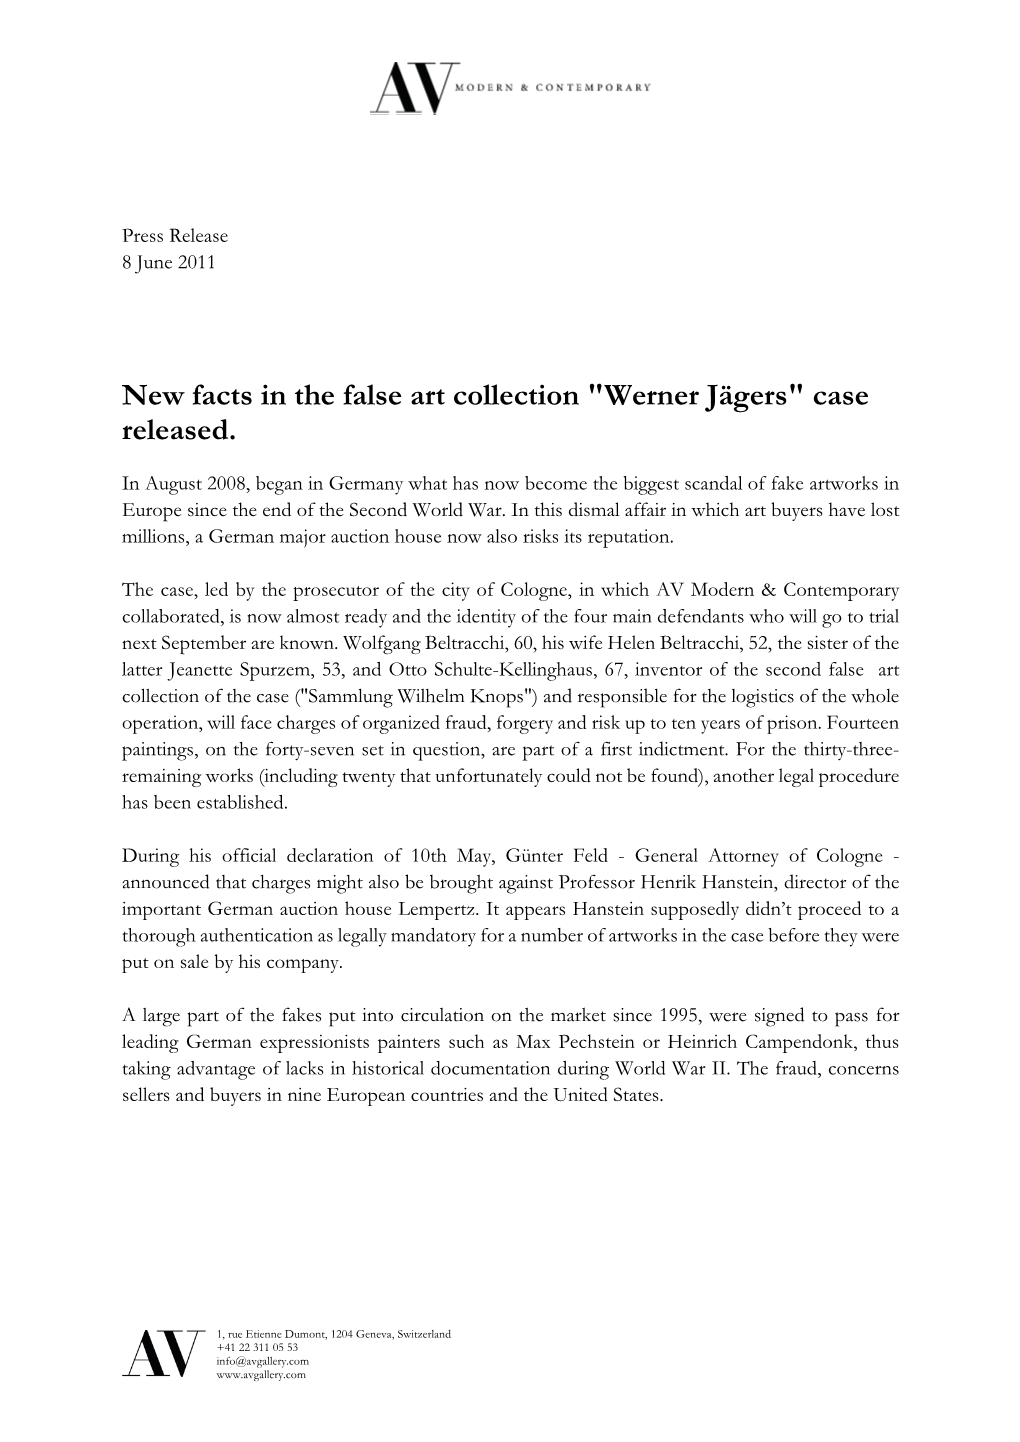 New Facts in the False Art Collection "Werner Jägers" Case Released